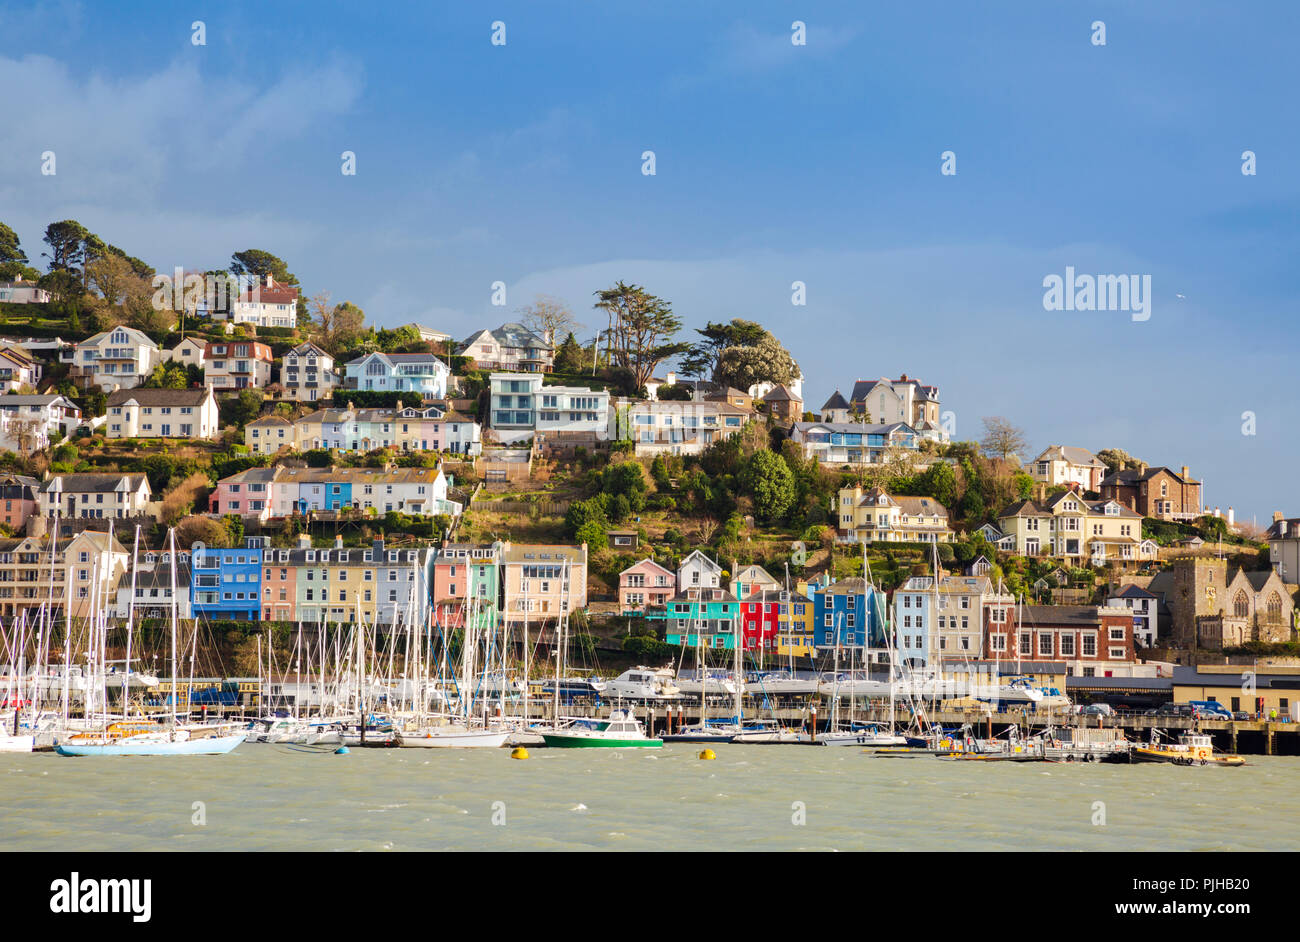 Kingswear across the River Dart from Dartmouth quayside, England Stock Photo